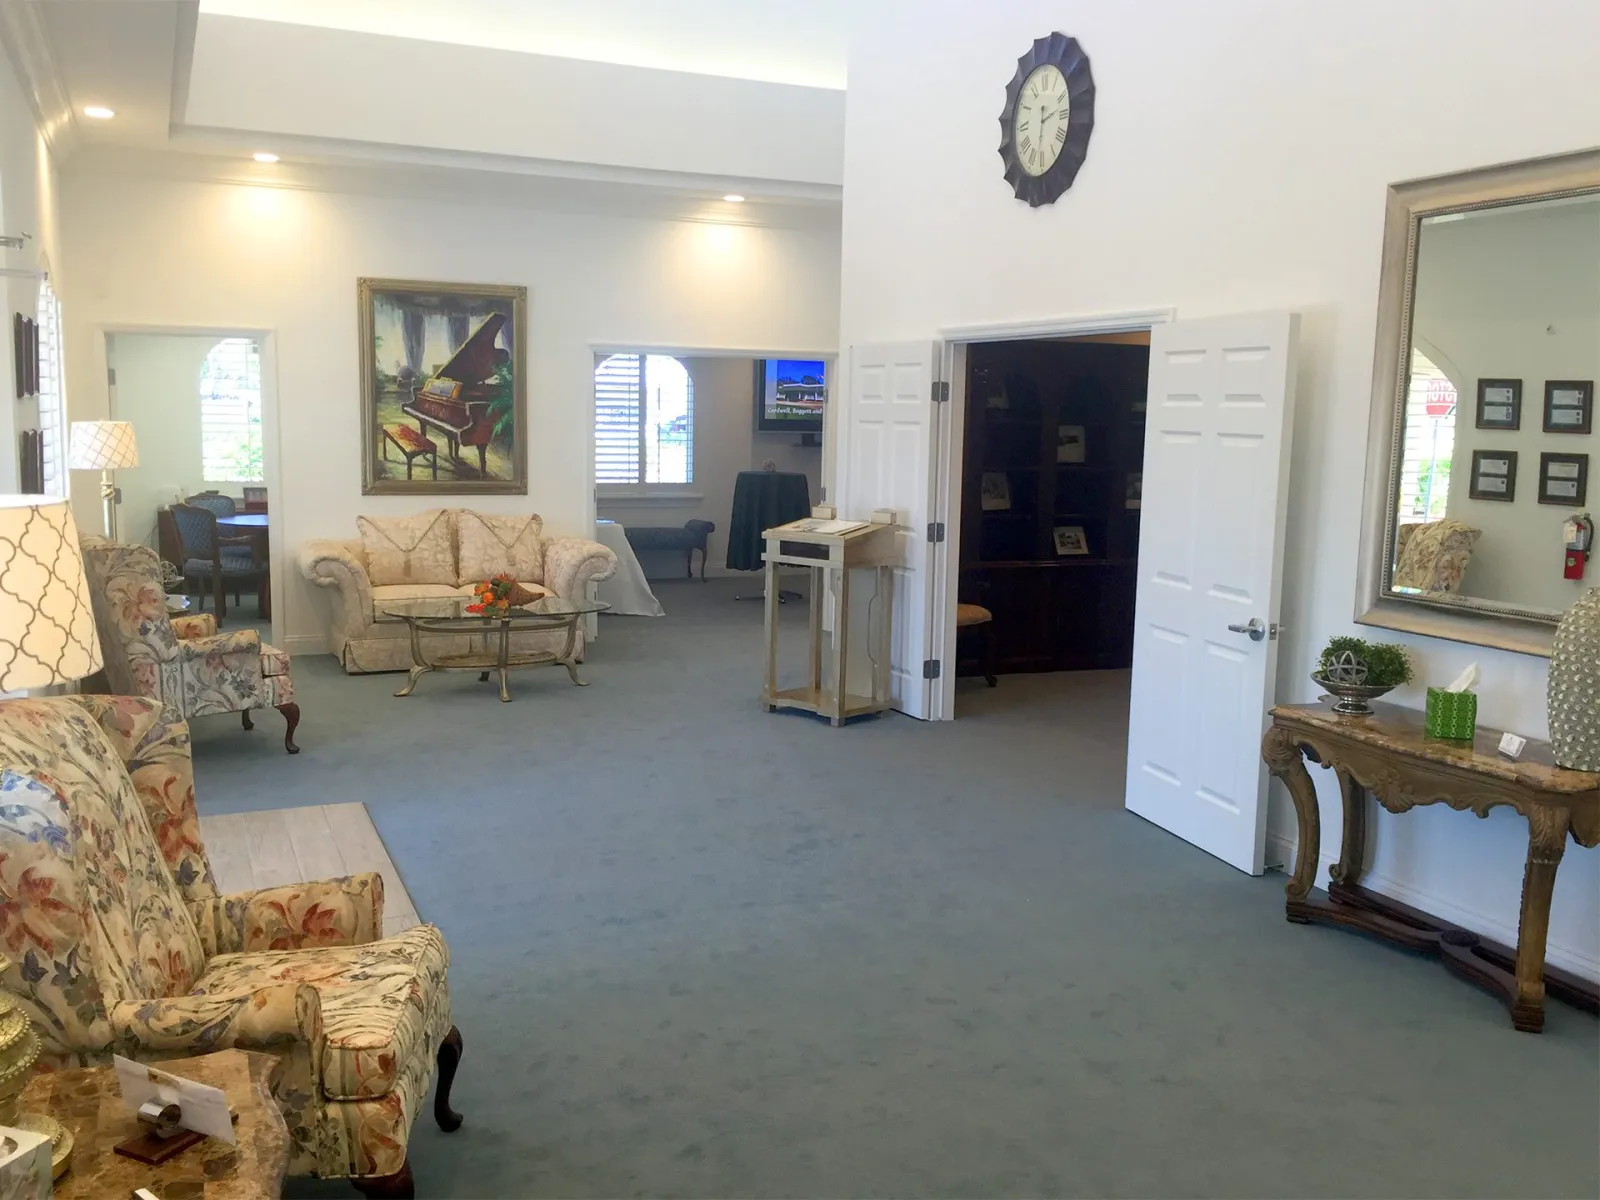 The interior of Cardwell Funeral Home in Daytona, Florida